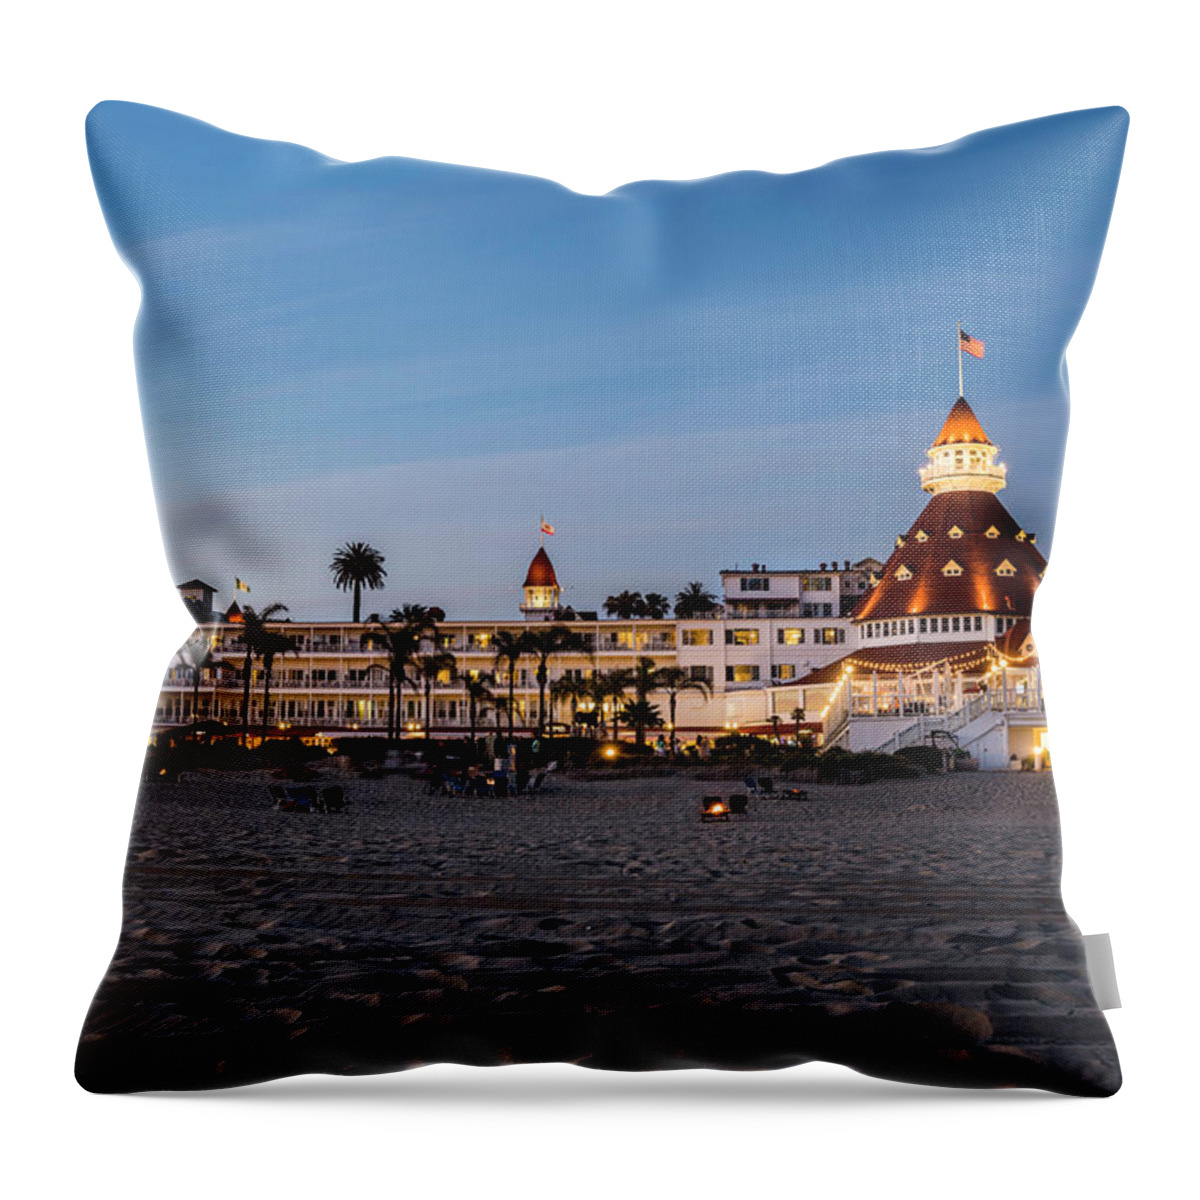 Landscape Throw Pillow featuring the photograph Hotel Del at Twilight by Scott Cunningham